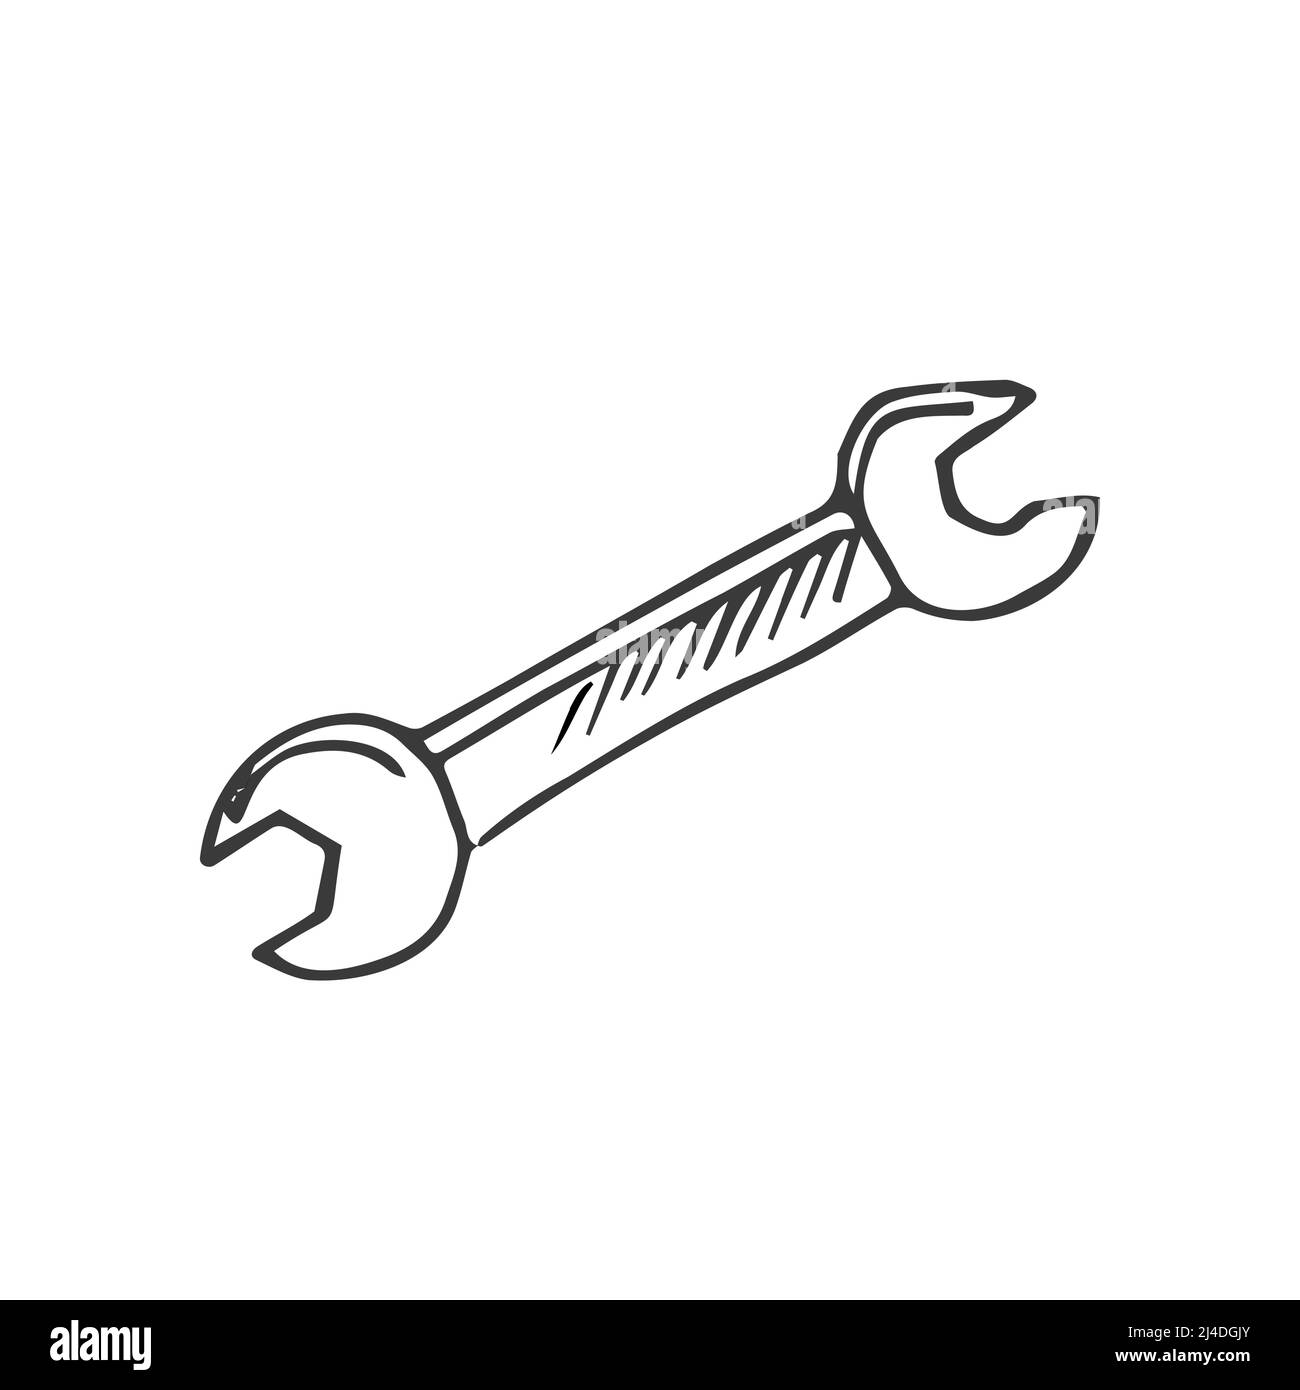 Wrench construction tool doodle icon. Hand drawn wrench. Doodle repair icon Stock Vector